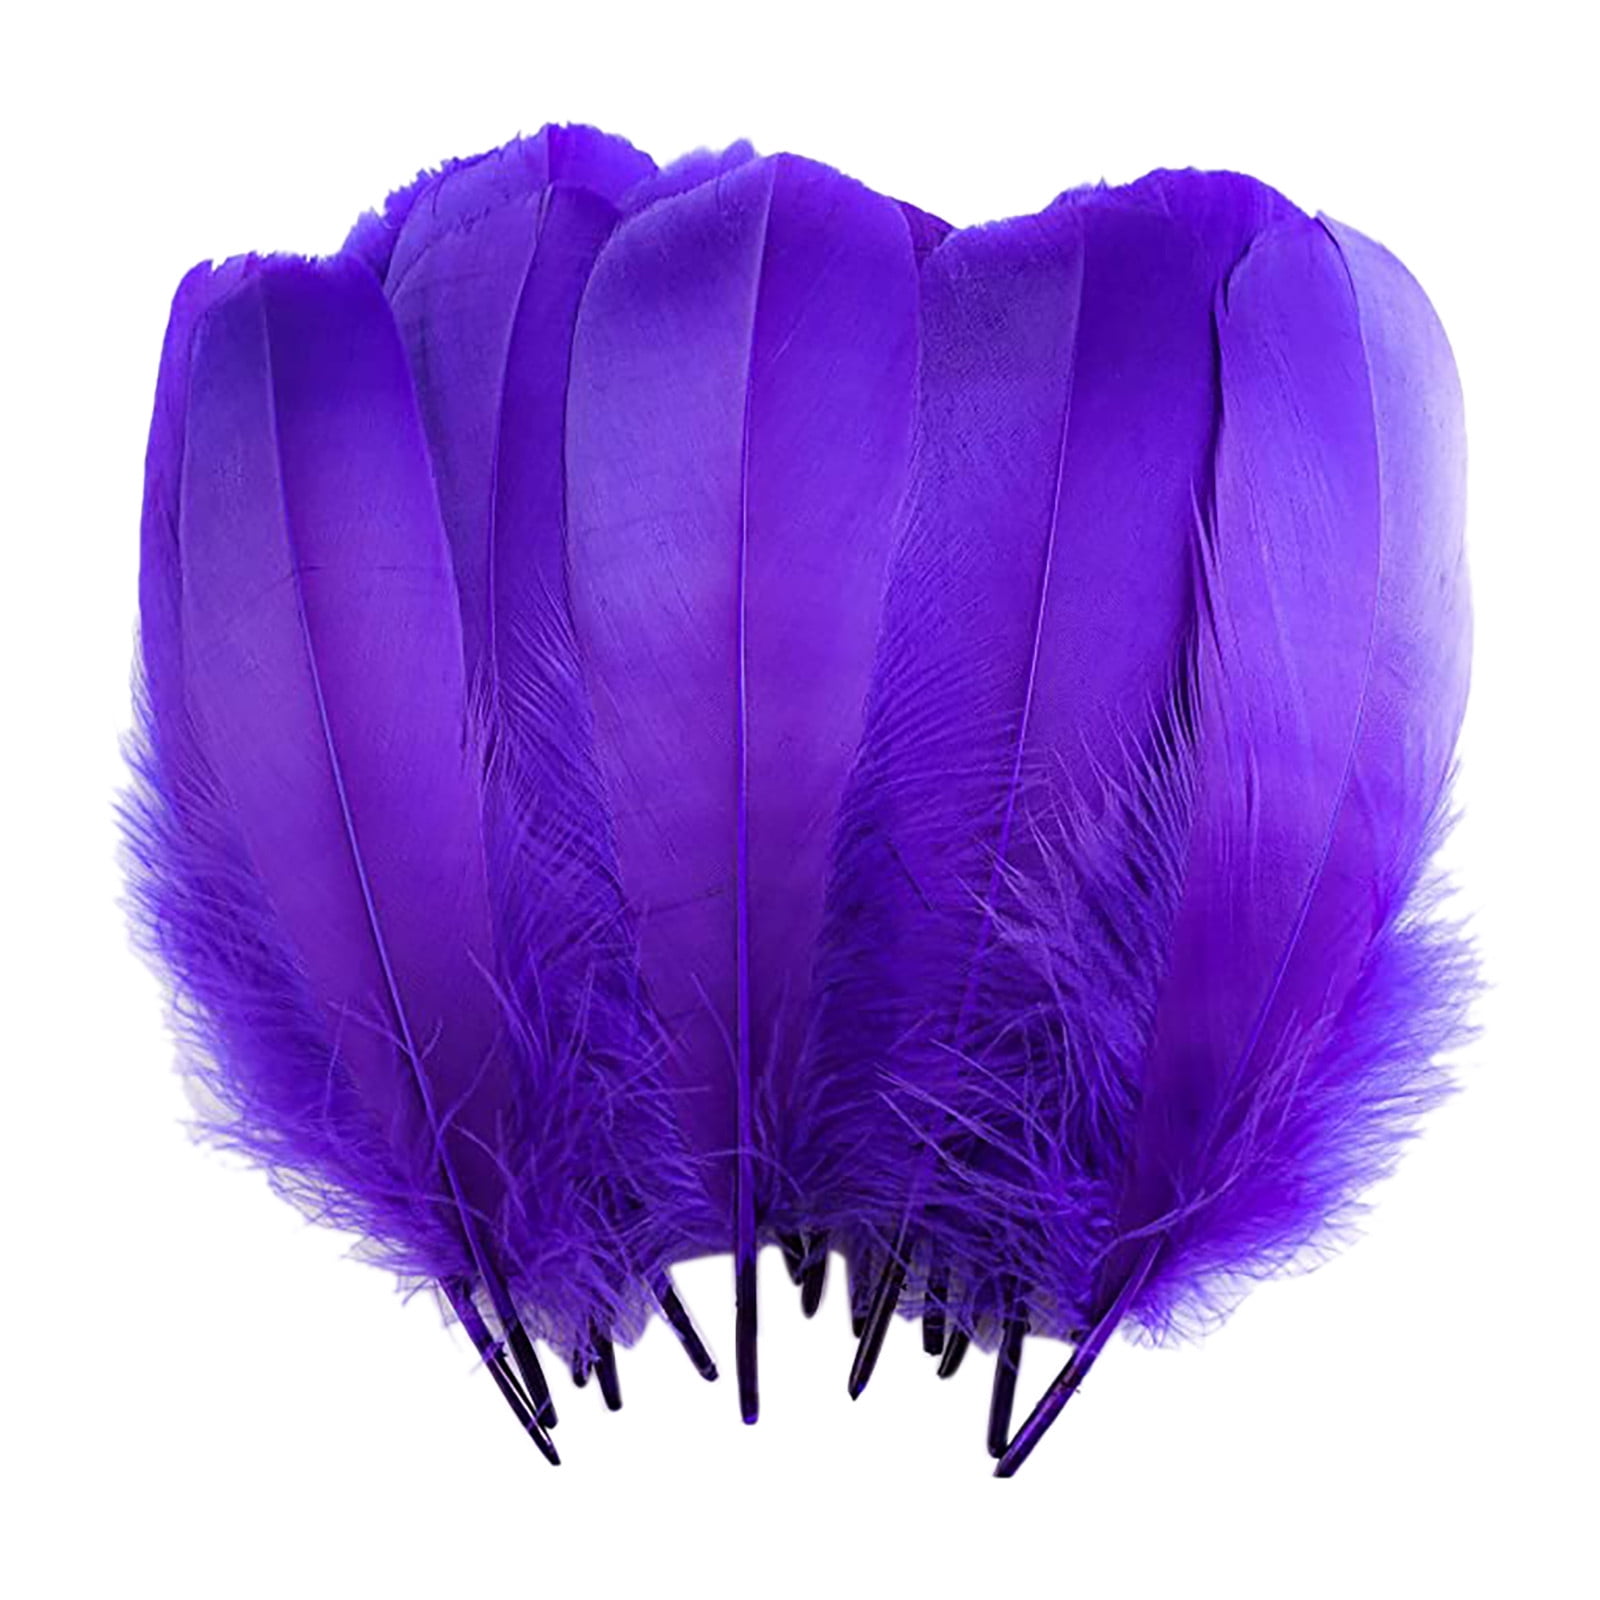 10-18cm 100 Pc Natural Feathers Short 4 to 7 In 